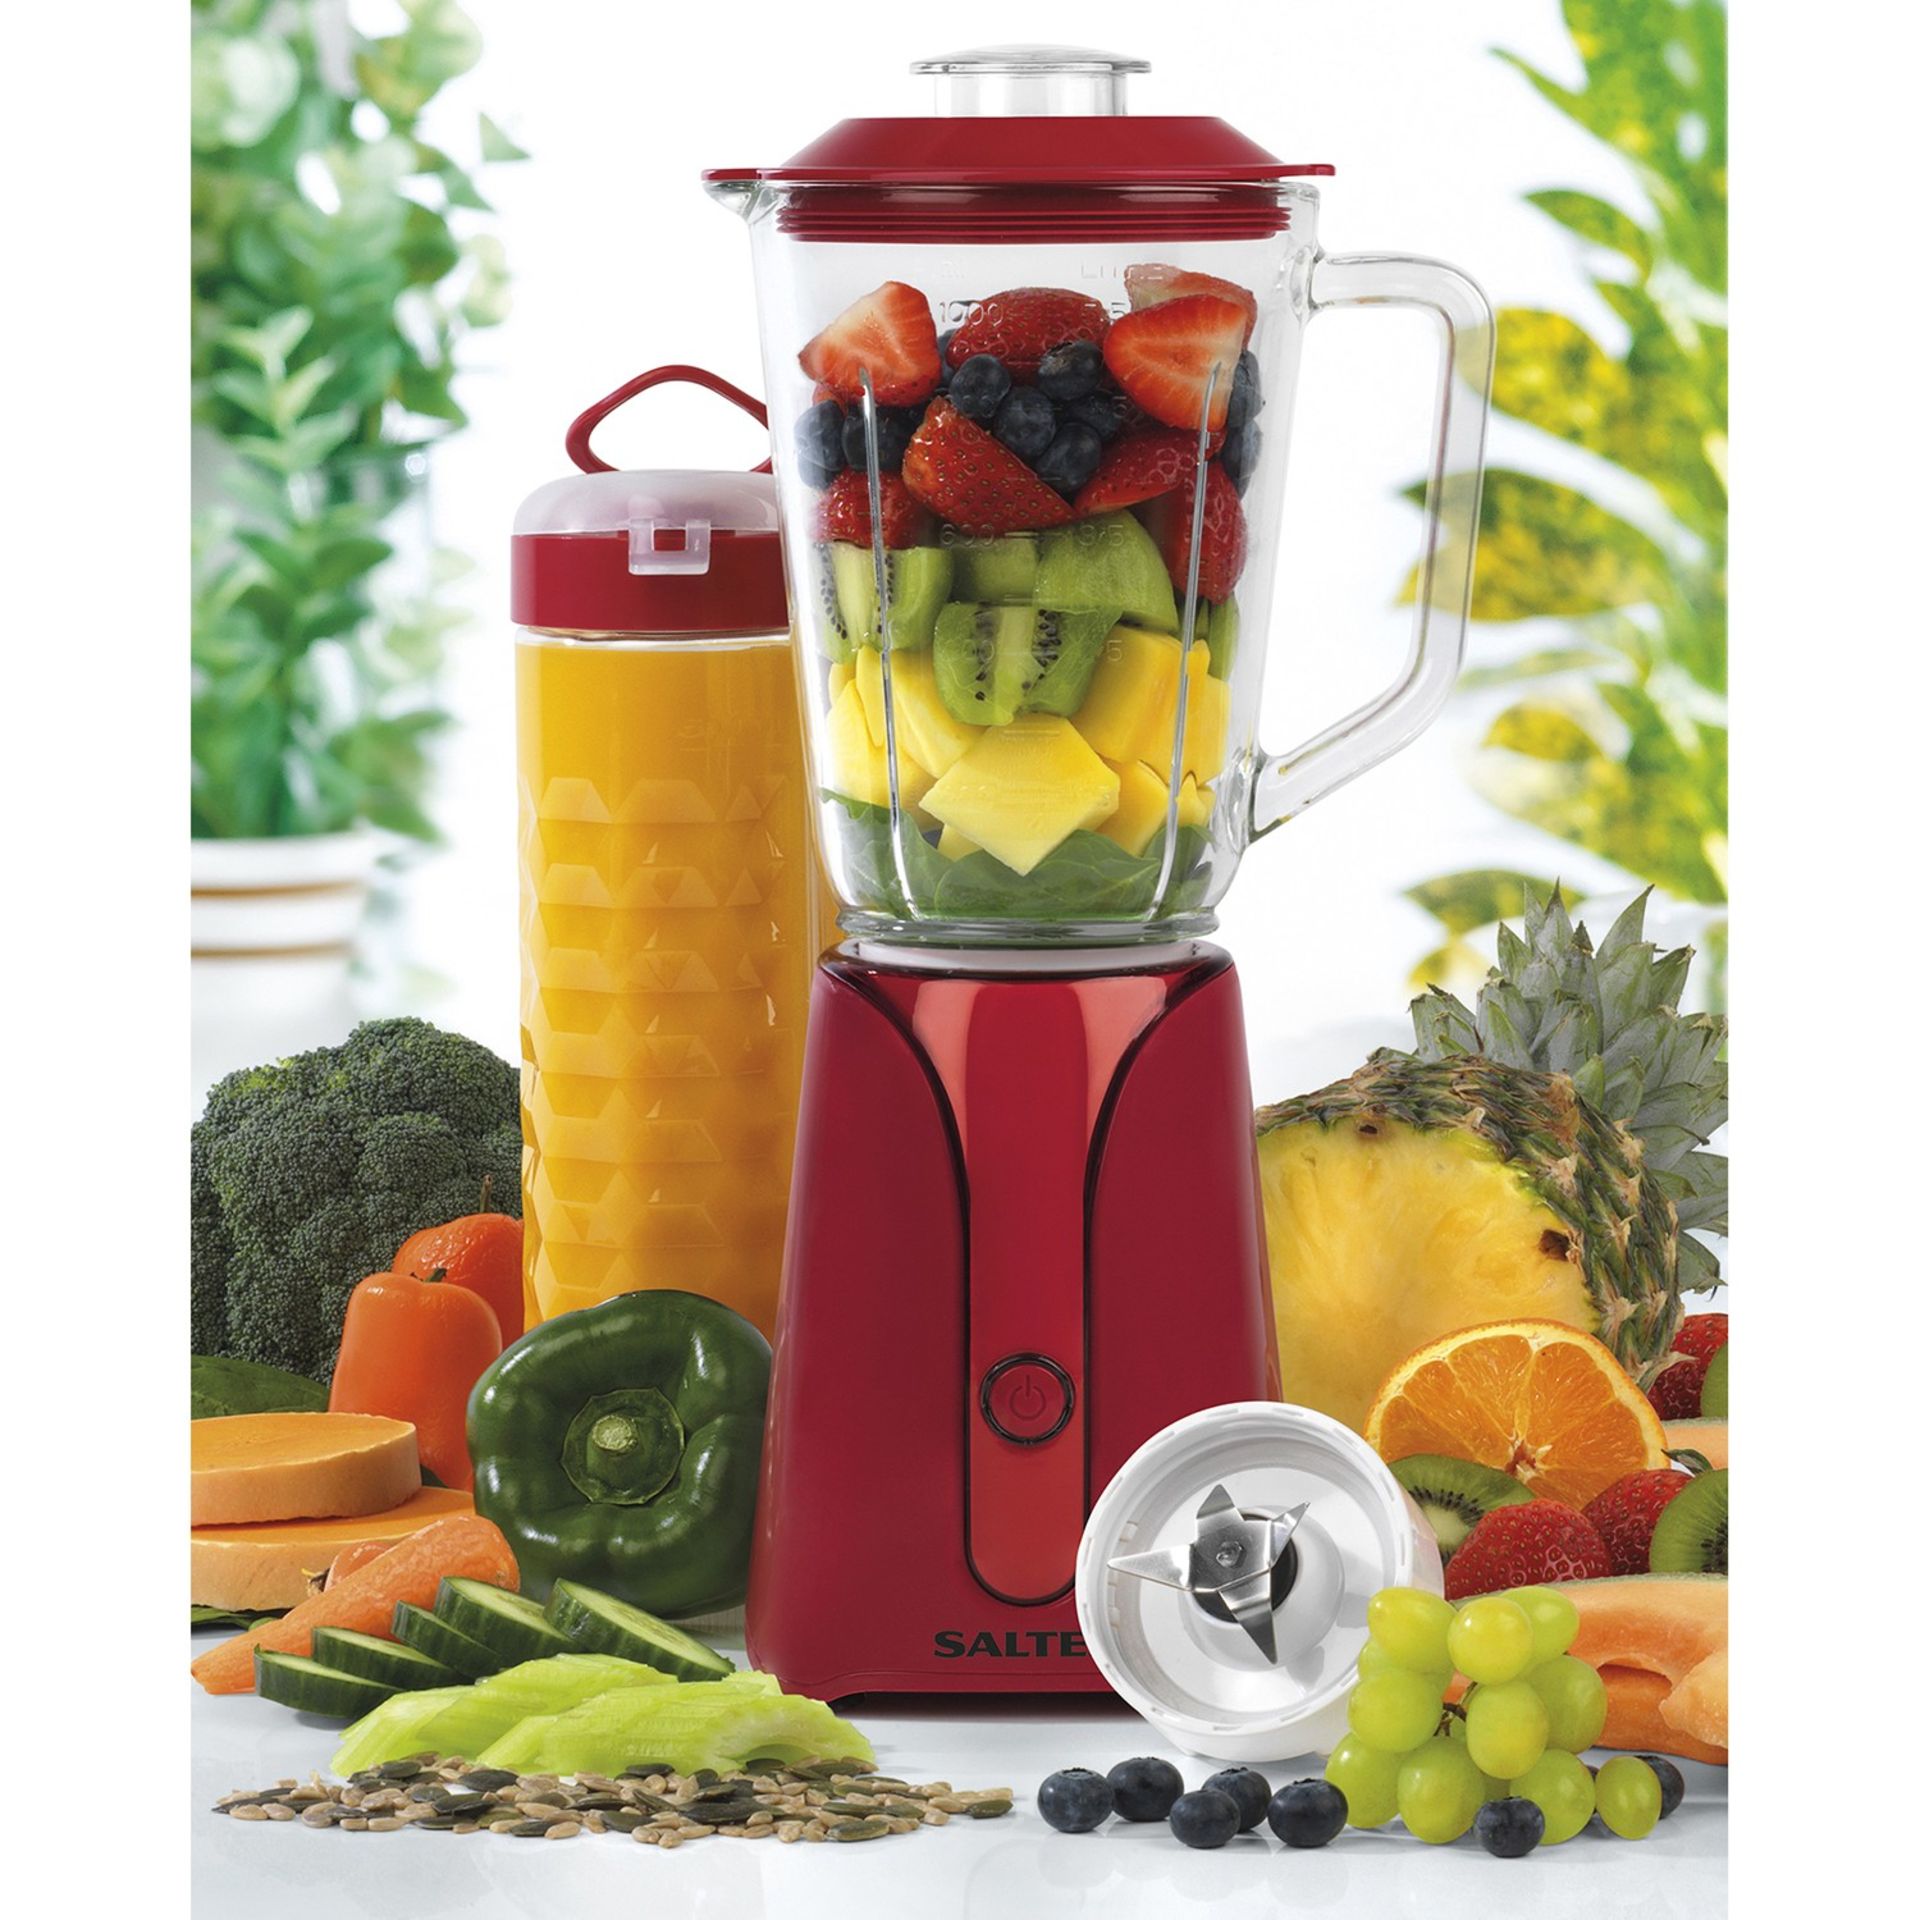 V Brand New Salter 2 In 1 To Go Blender Set With Stainless Steel Crossblade Attachment-Diamond - Image 2 of 2